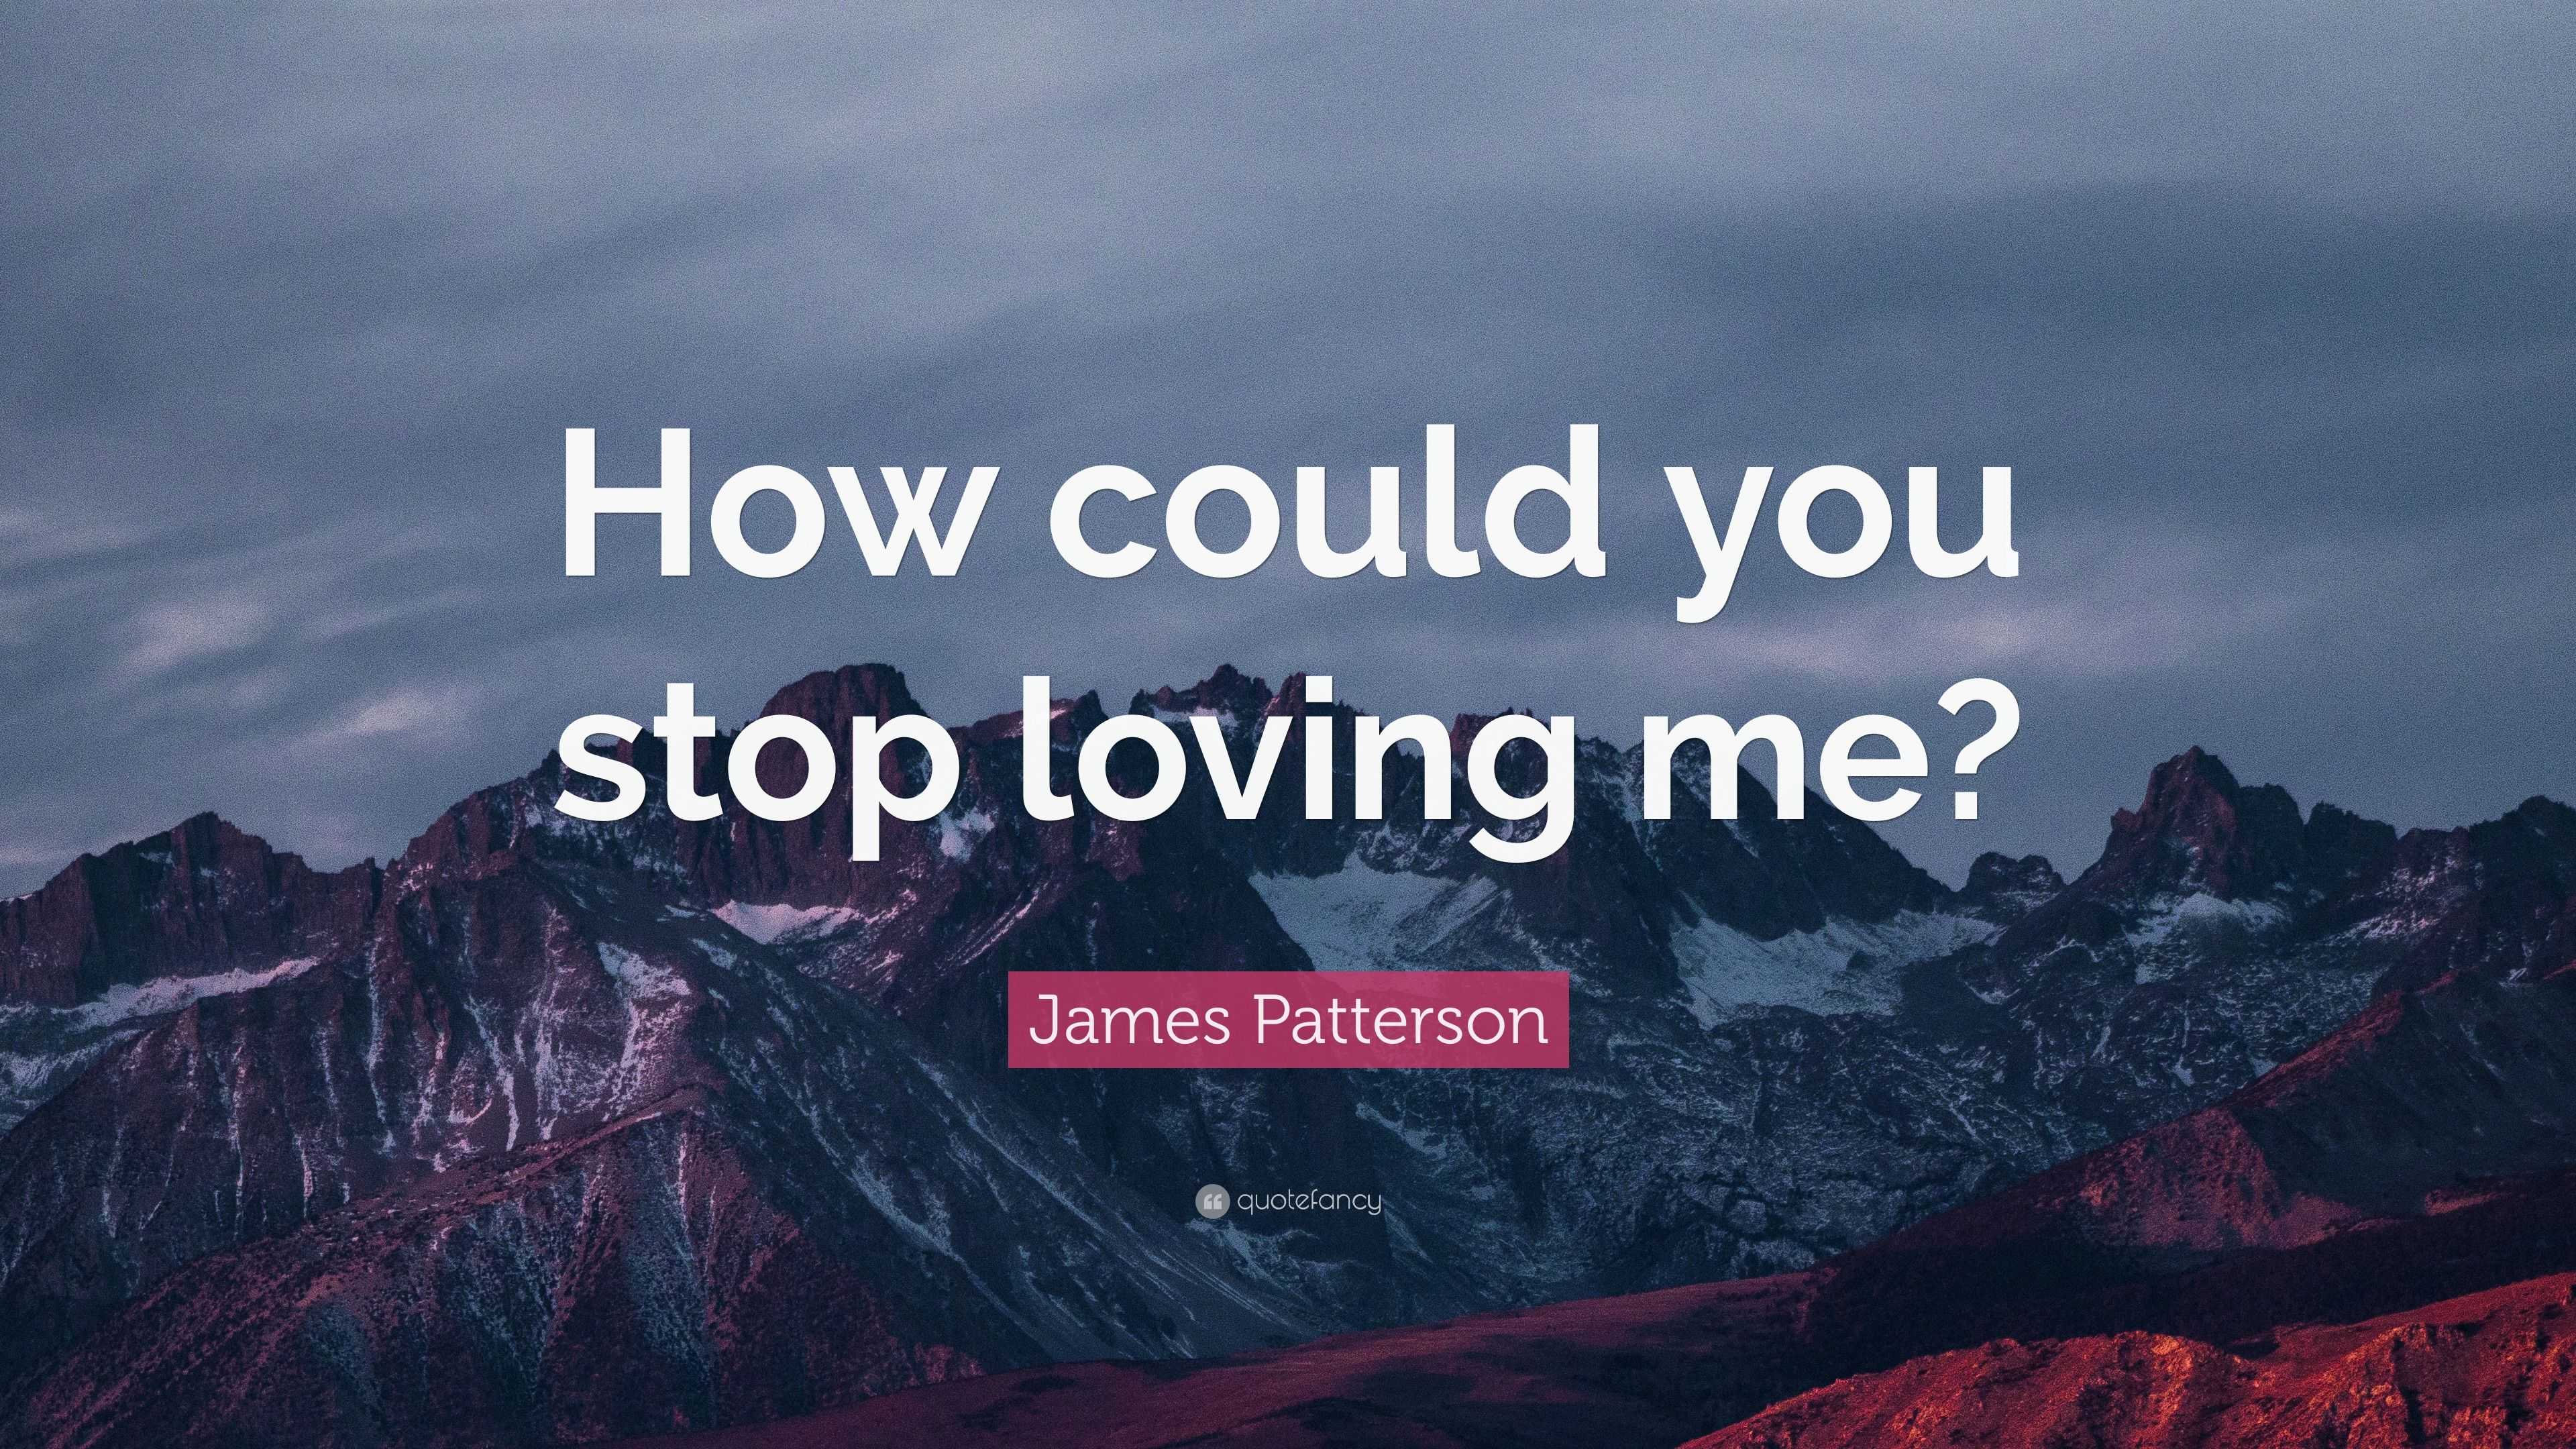 James Patterson Quote “how Could You Stop Loving Me” 9563